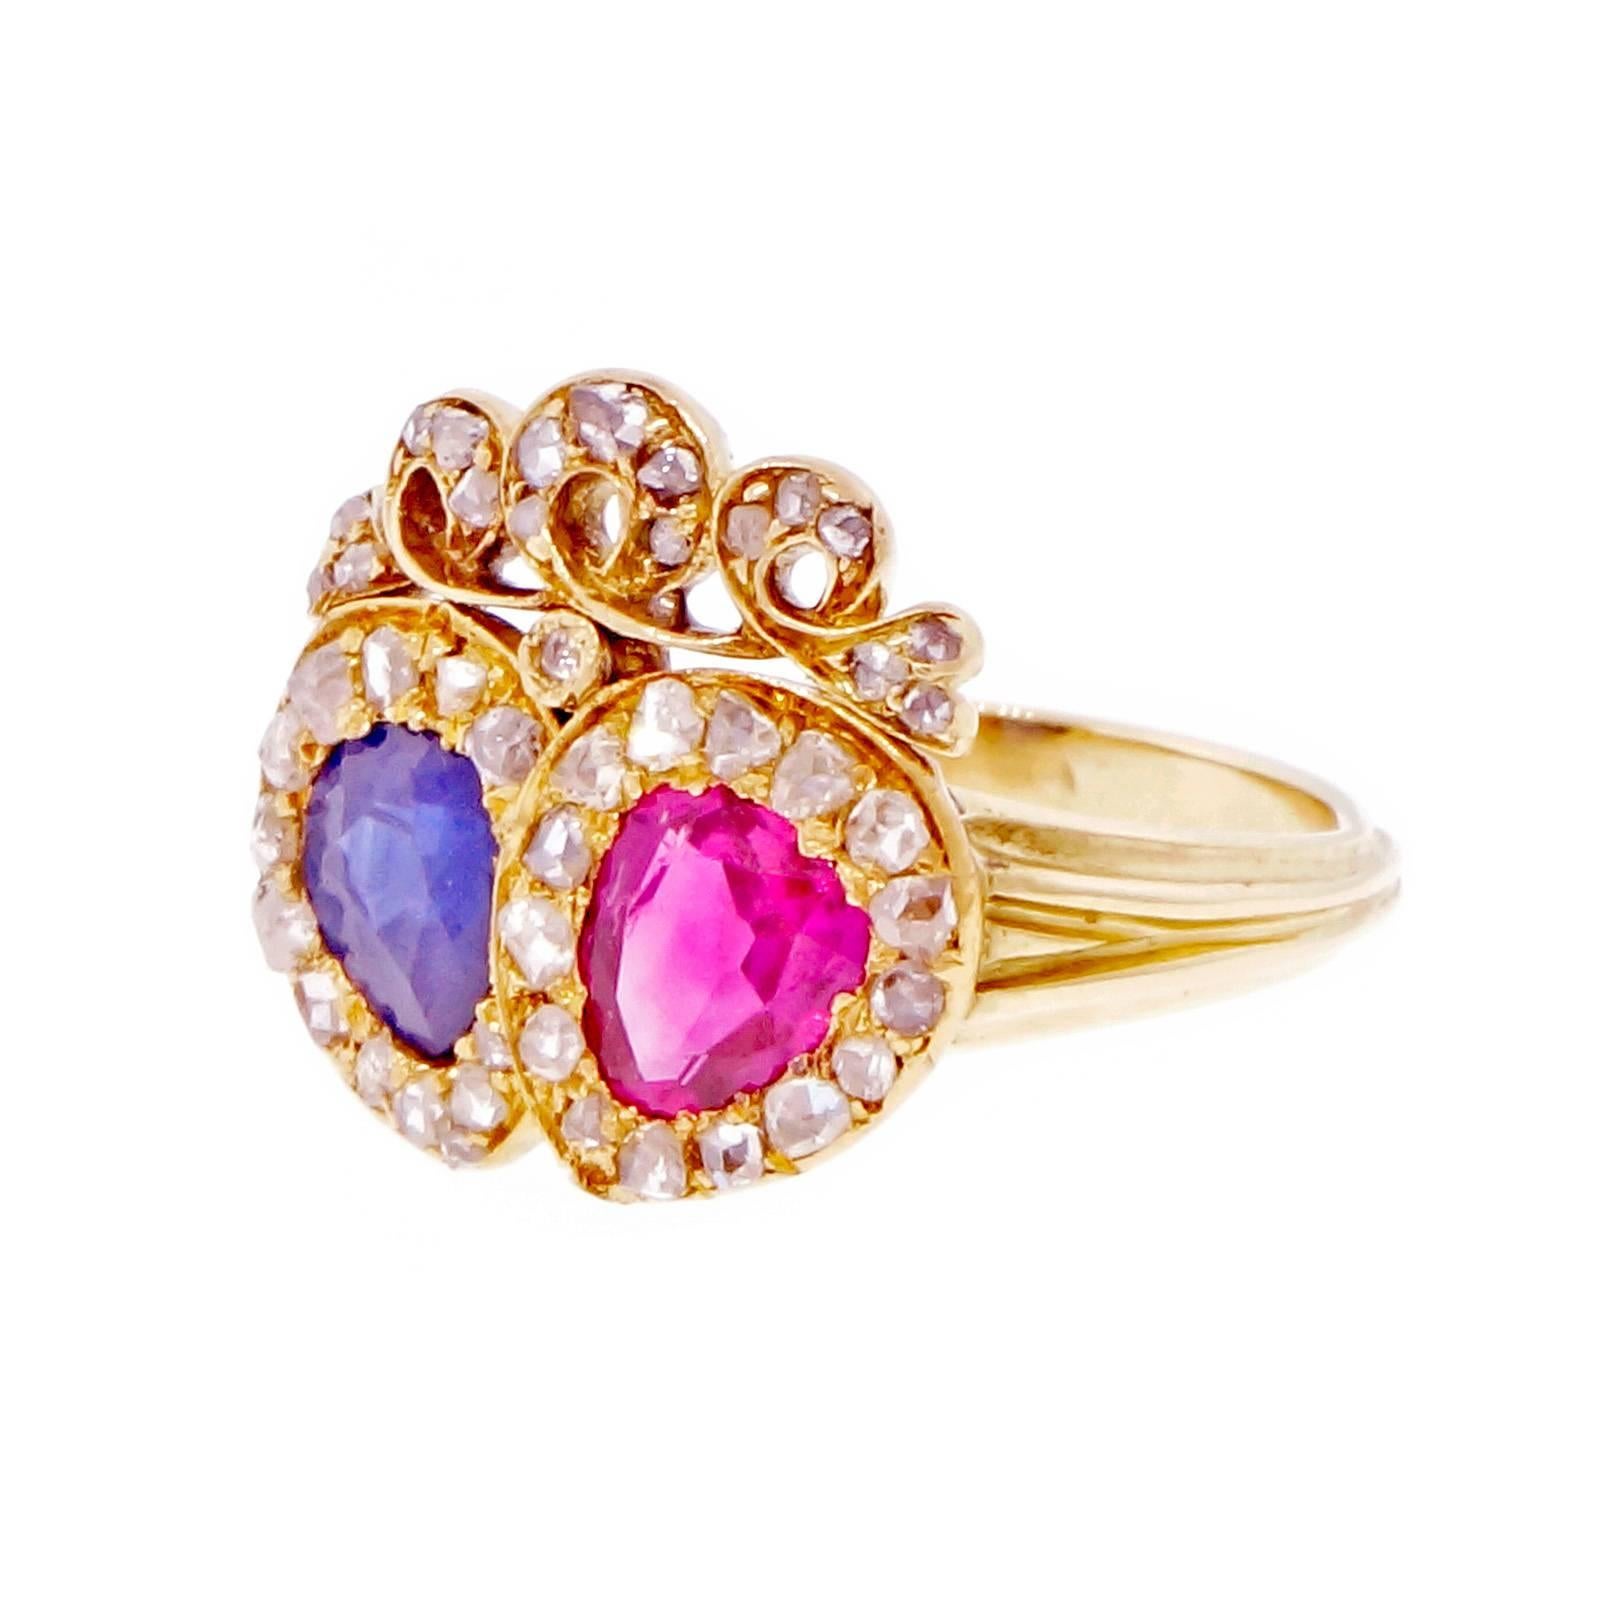 Victorian sapphire, ruby and diamond crown ring. circa 1870. GIA certified pear shaped Burman natural no heat ruby and cornflower sapphire set an 18k yellow gold crown setting with a halo of 42 rose cut diamonds. A truly unique and rare gem from the